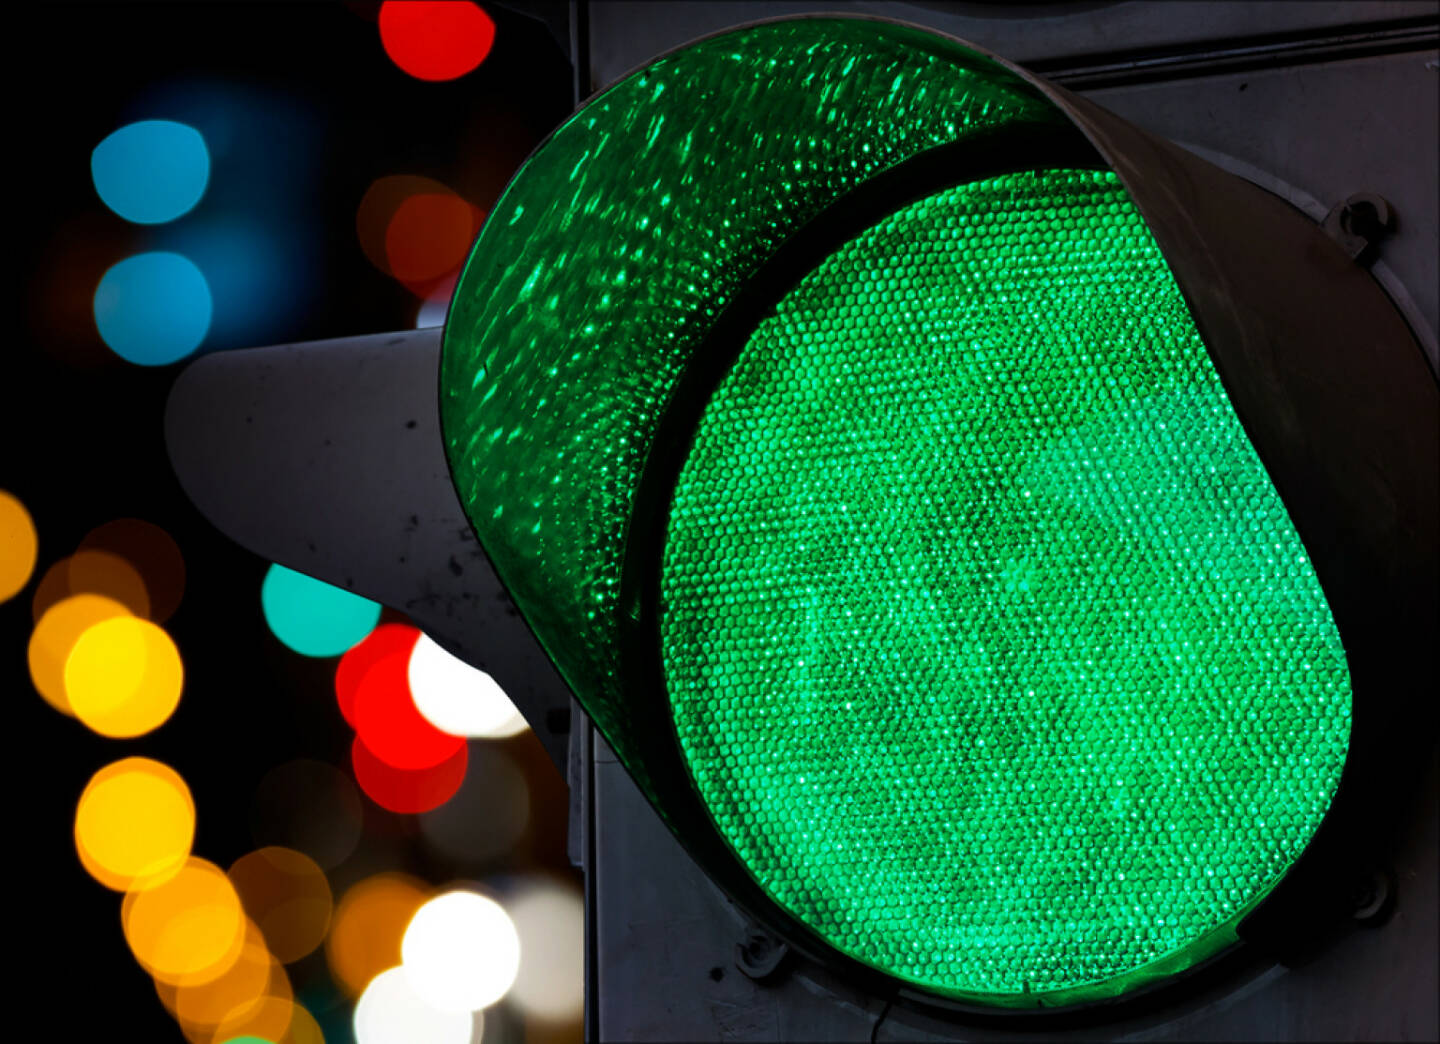 Ampel, grün, go, los, freie Fahrt, http://www.shutterstock.com/de/pic-116908762/stock-photo-green-traffic-light-with-colorful-unfocused-lights-on-a-background.html 